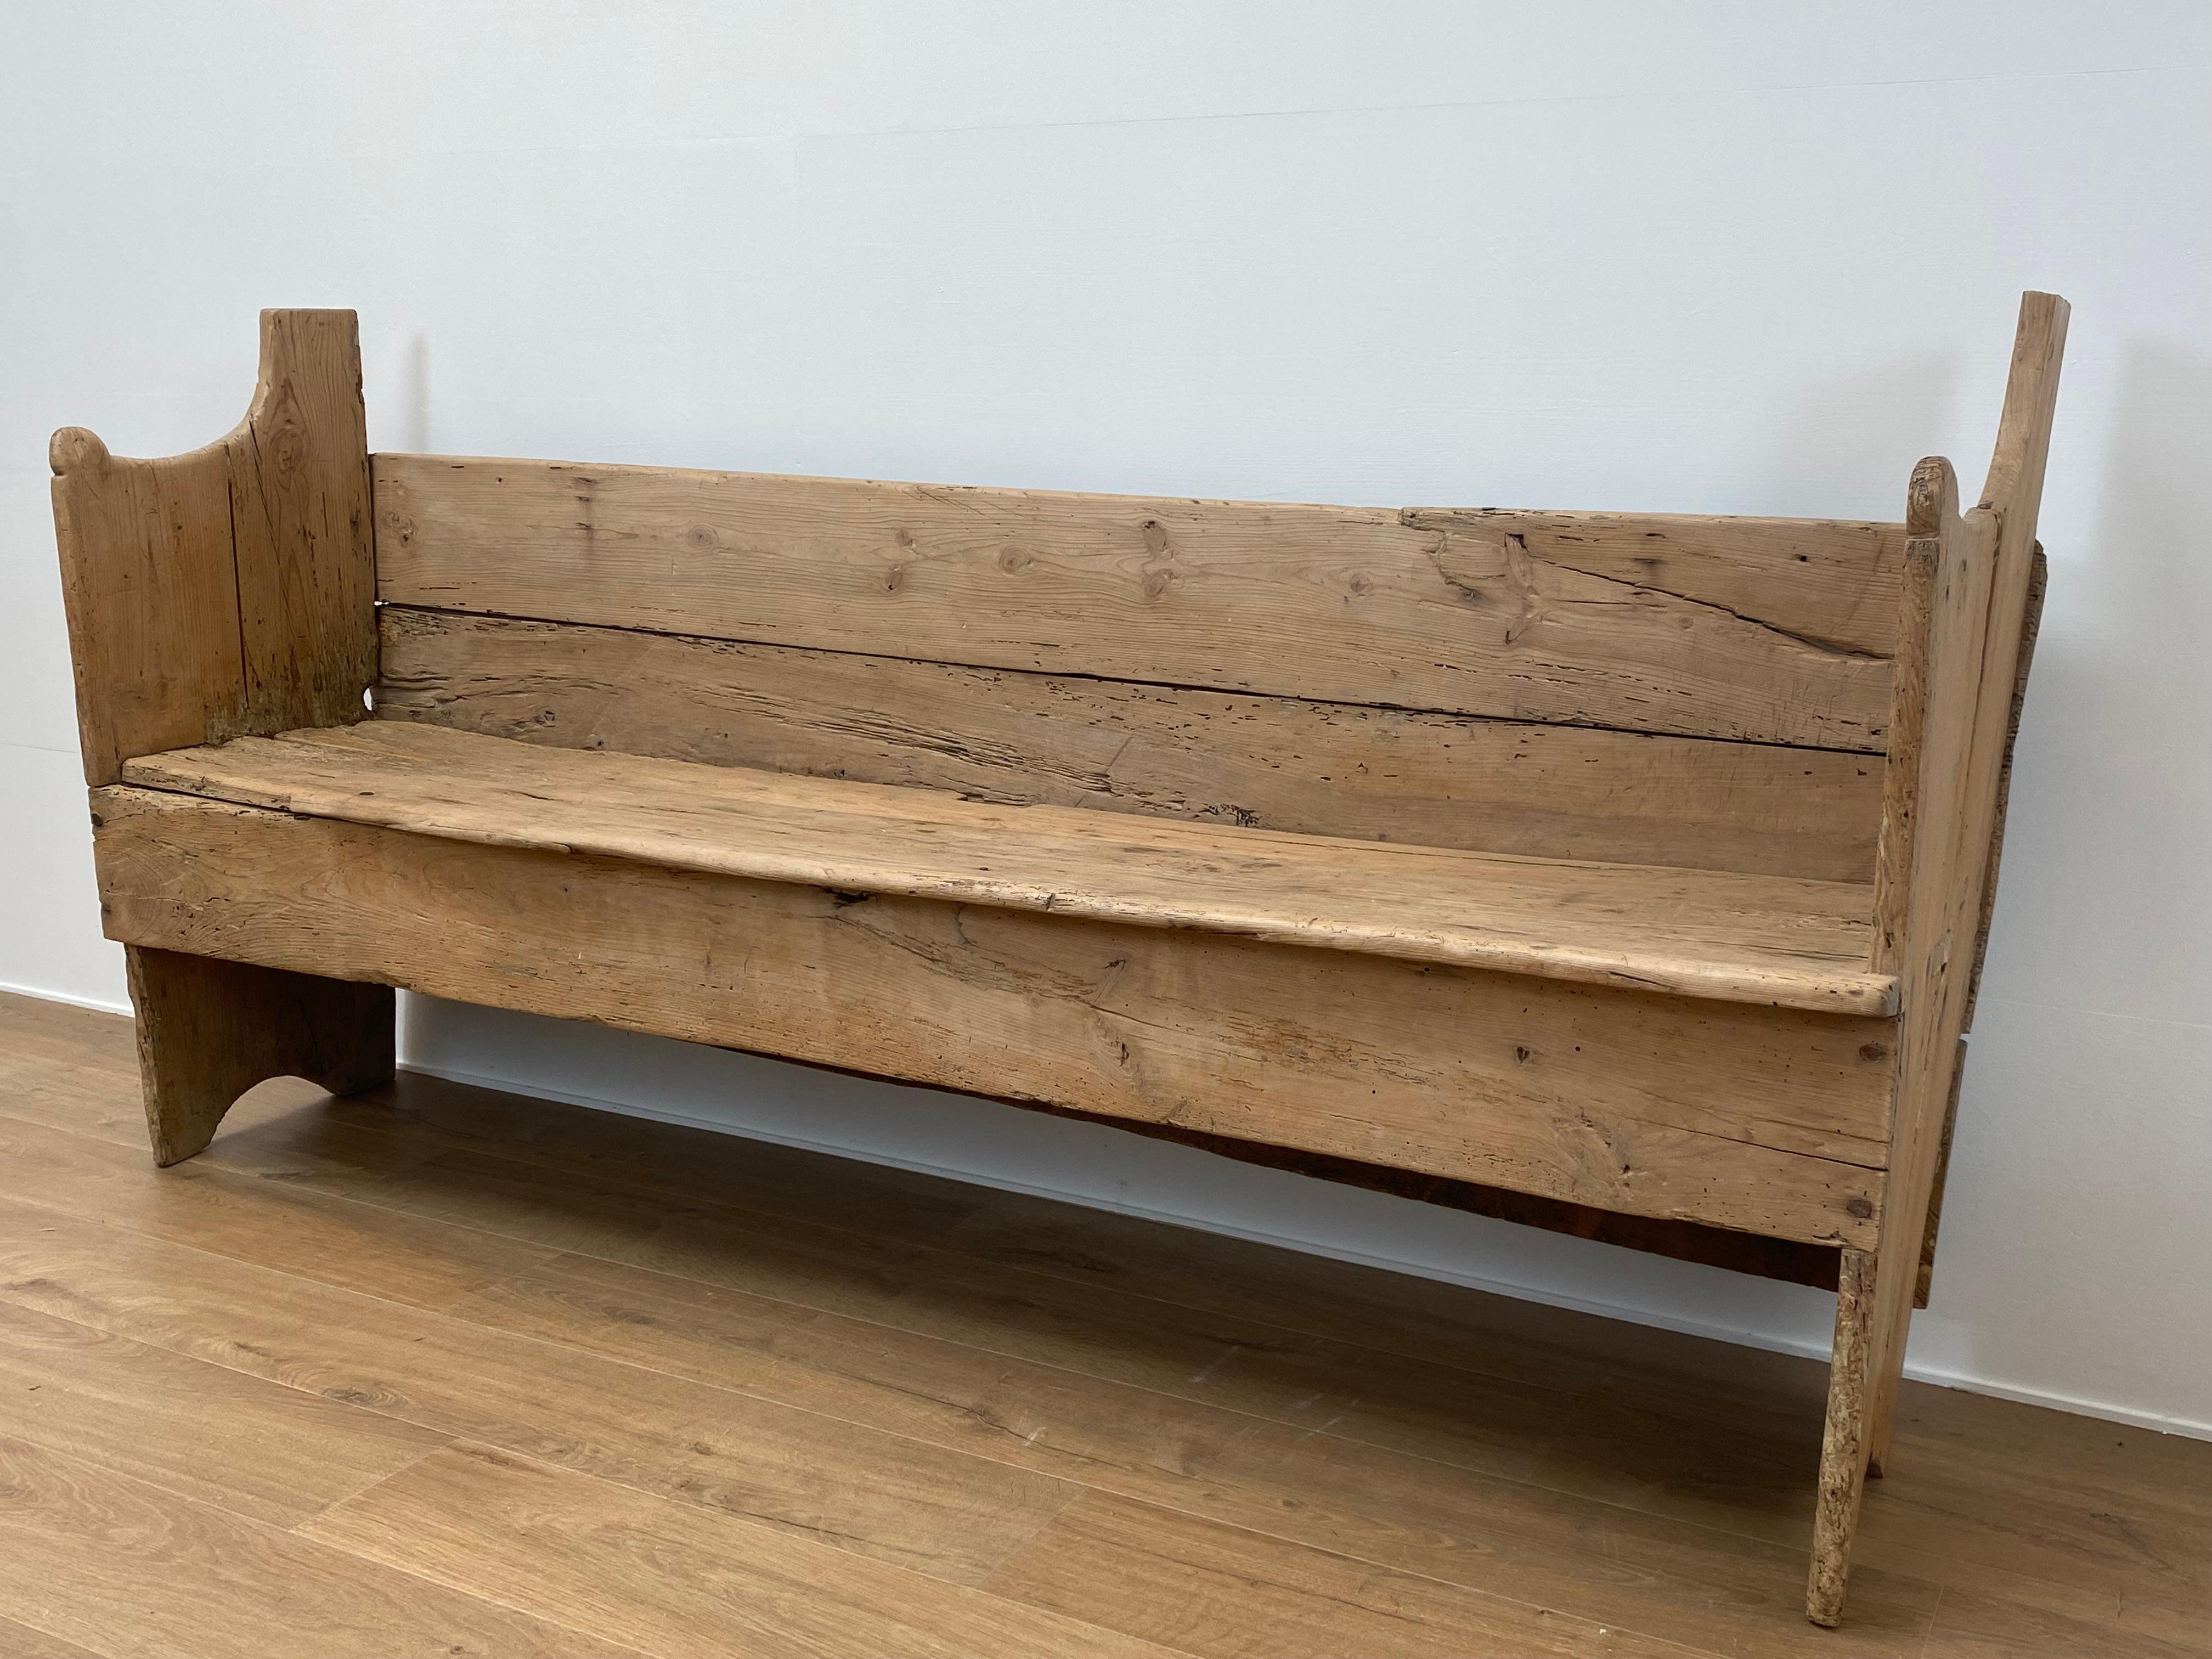 Rustic Antique Spanish Bench in a Bleached Wood 1